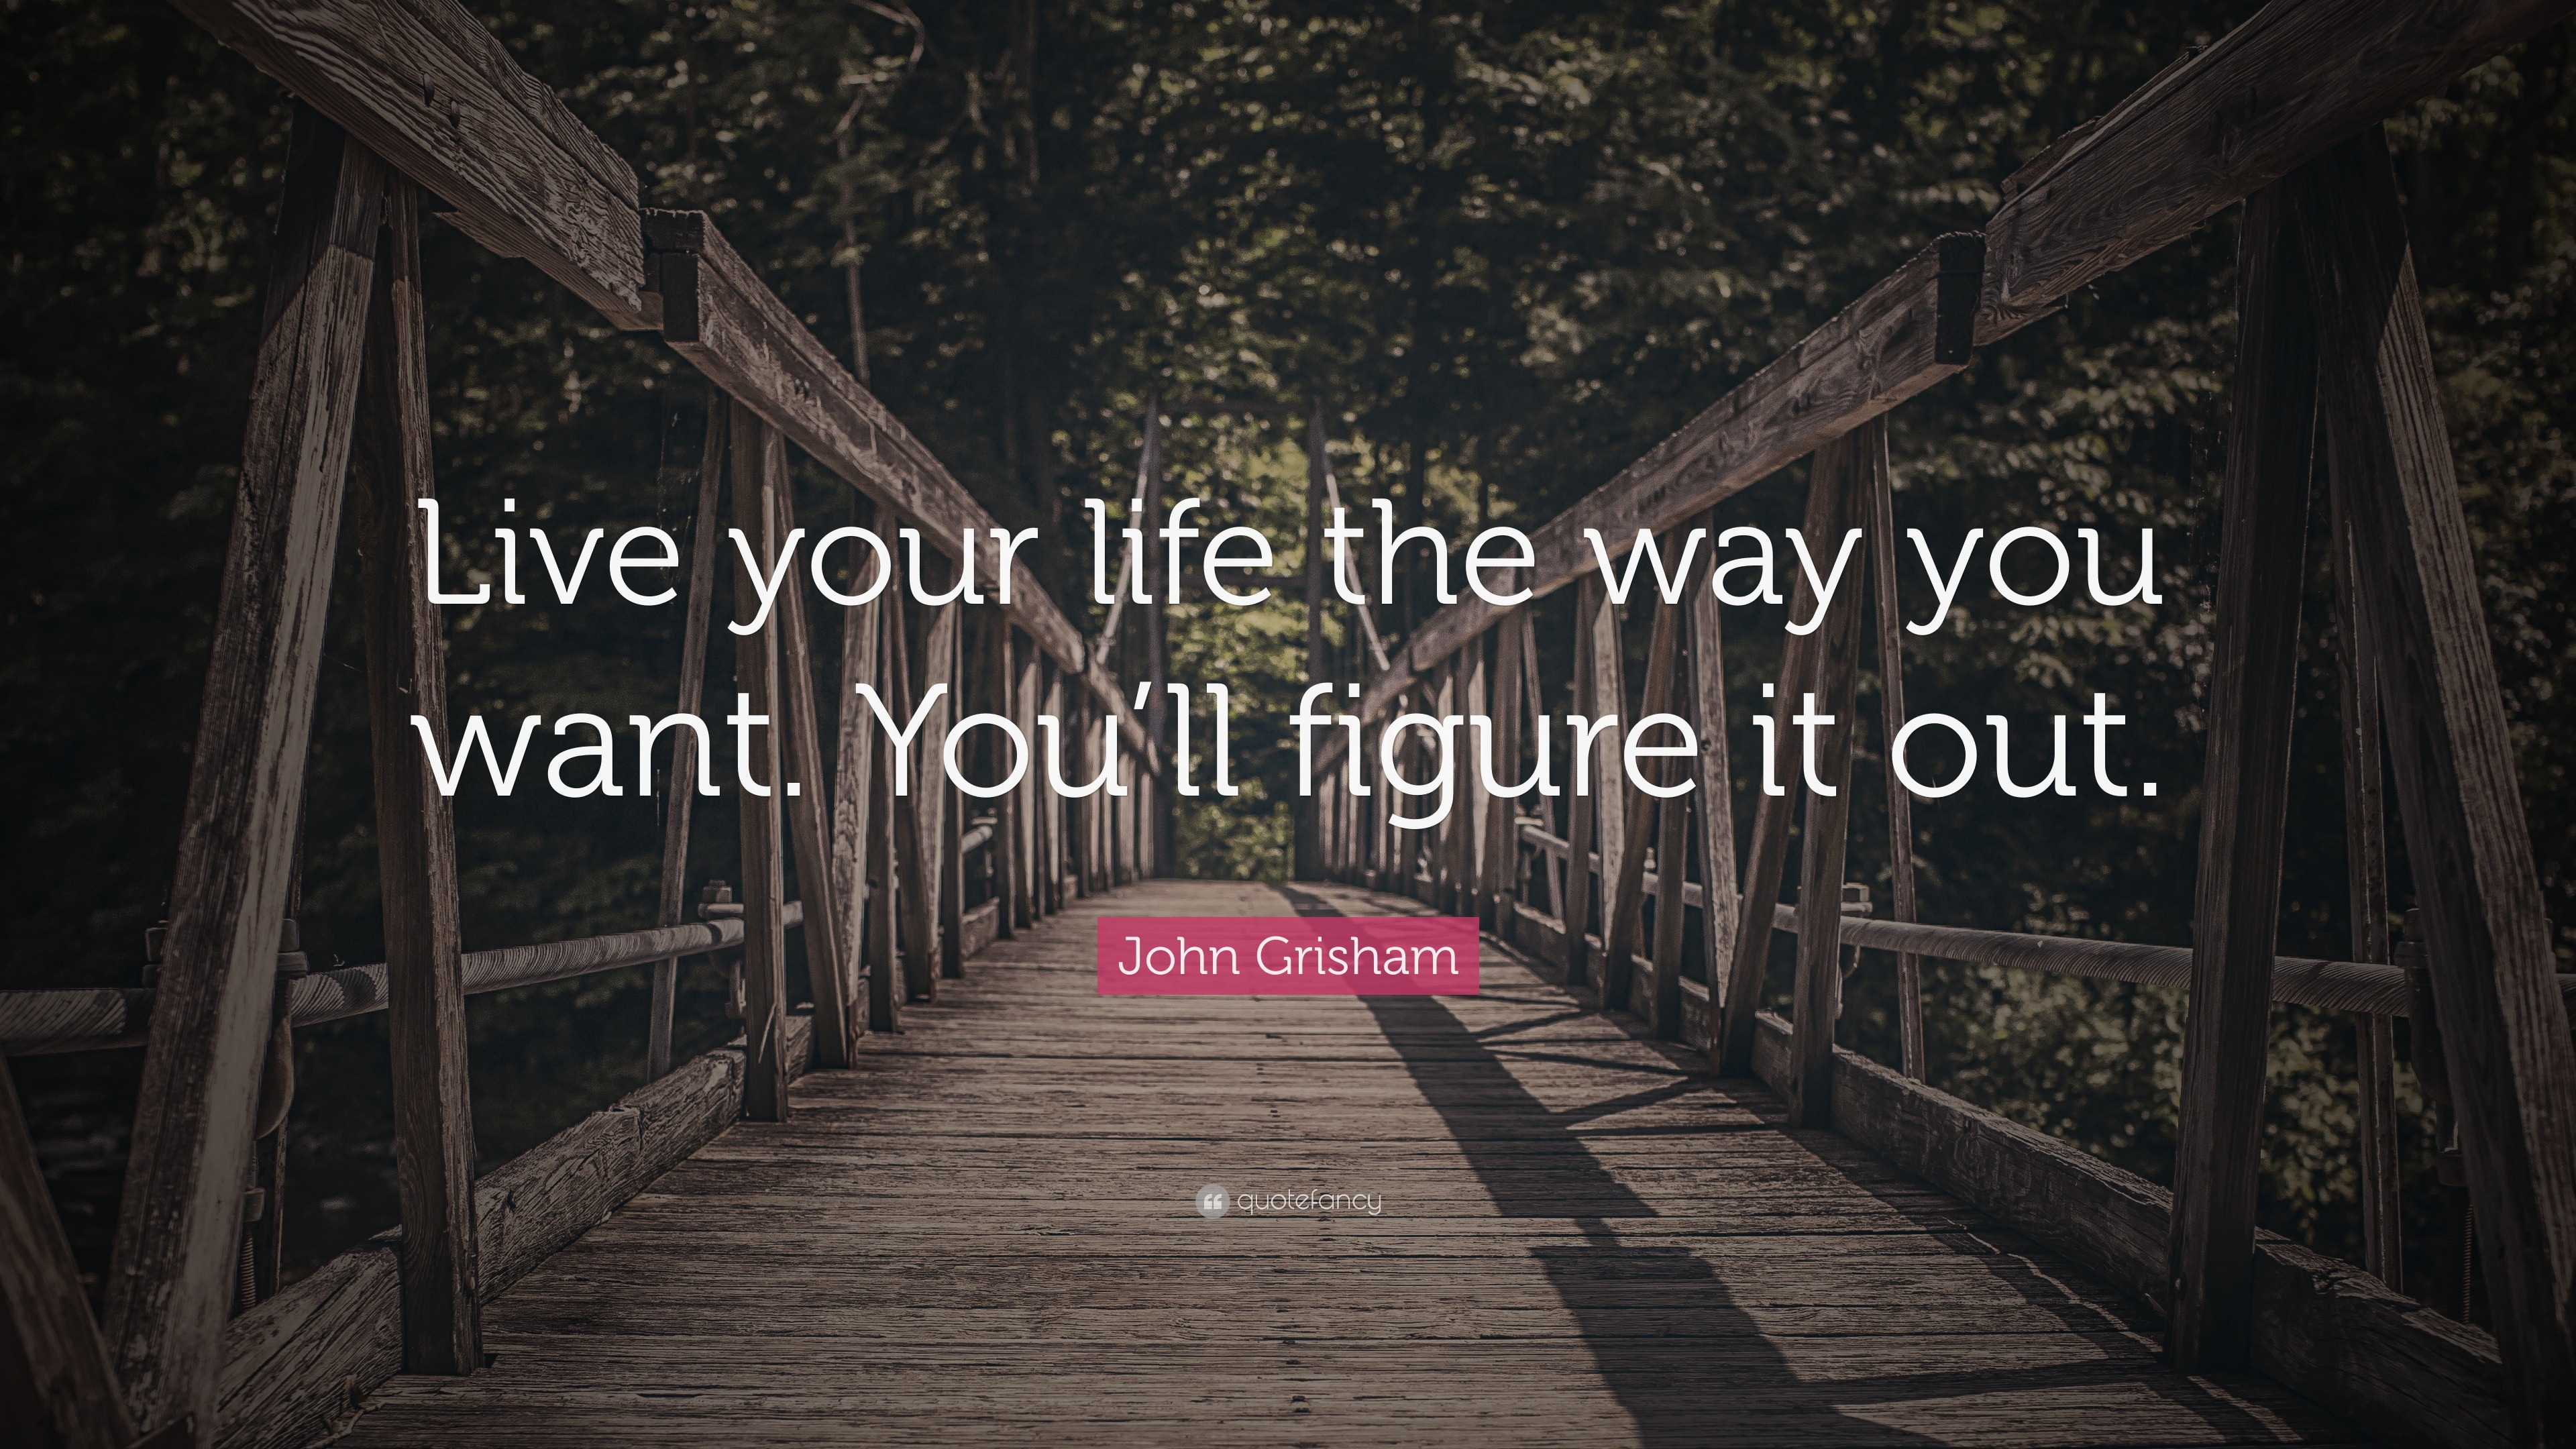 John Grisham Quote Live Your Life The Way You Want You Ll Figure It Out